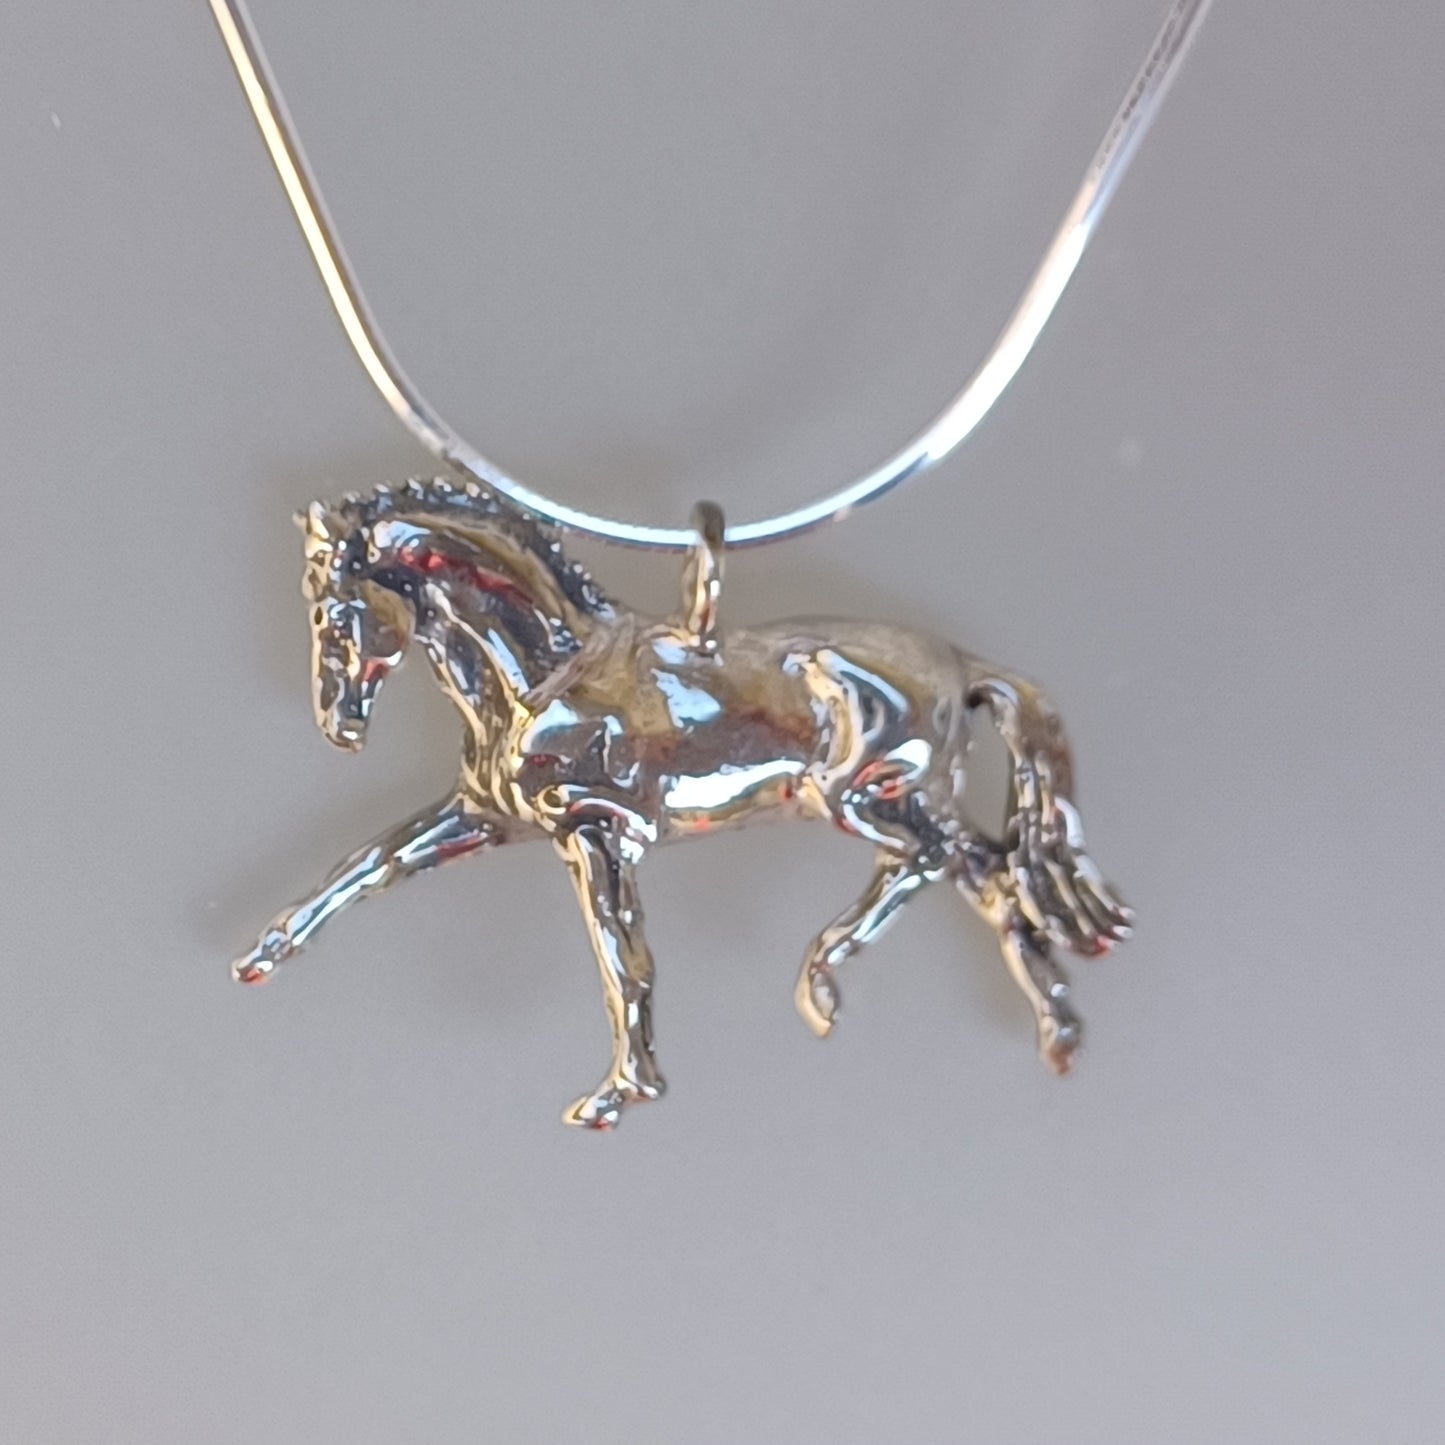 Horse Jewelry dressage extended trot sterling silver. SOLID sterling silver pendant and chain Zimmer  Best Prices on Silver Horses